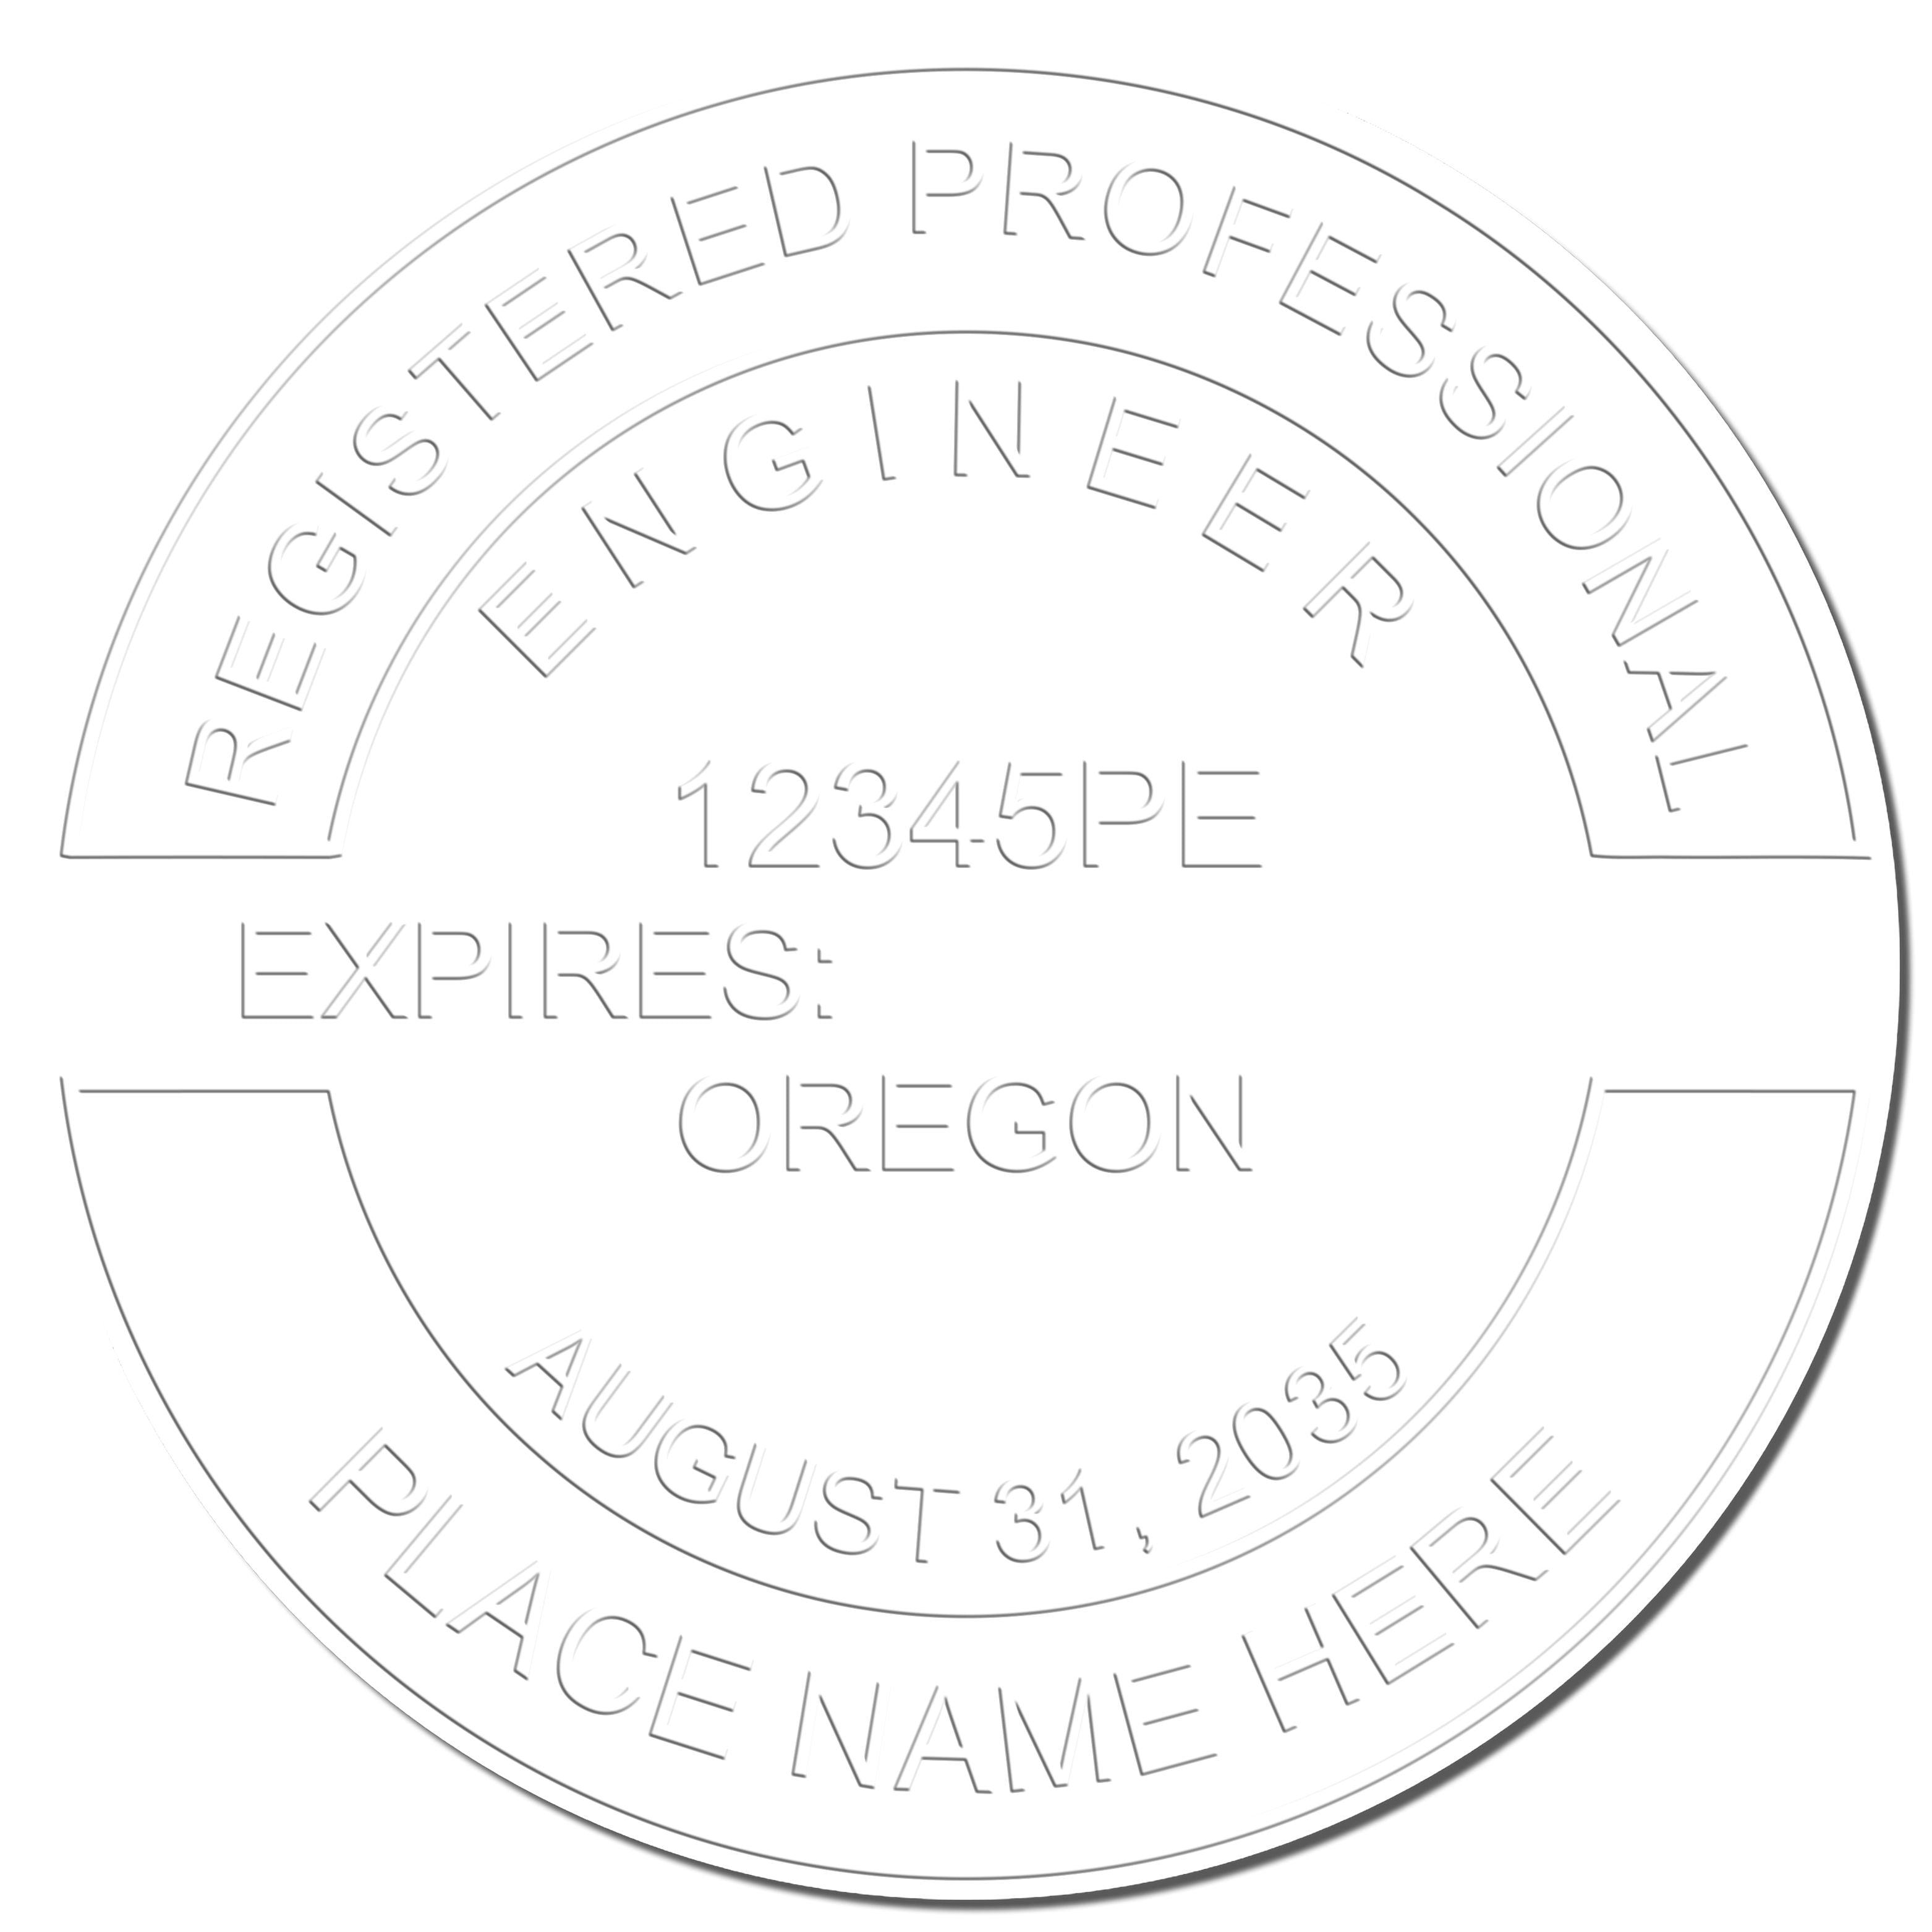 The Soft Oregon Professional Engineer Seal stamp impression comes to life with a crisp, detailed photo on paper - showcasing true professional quality.